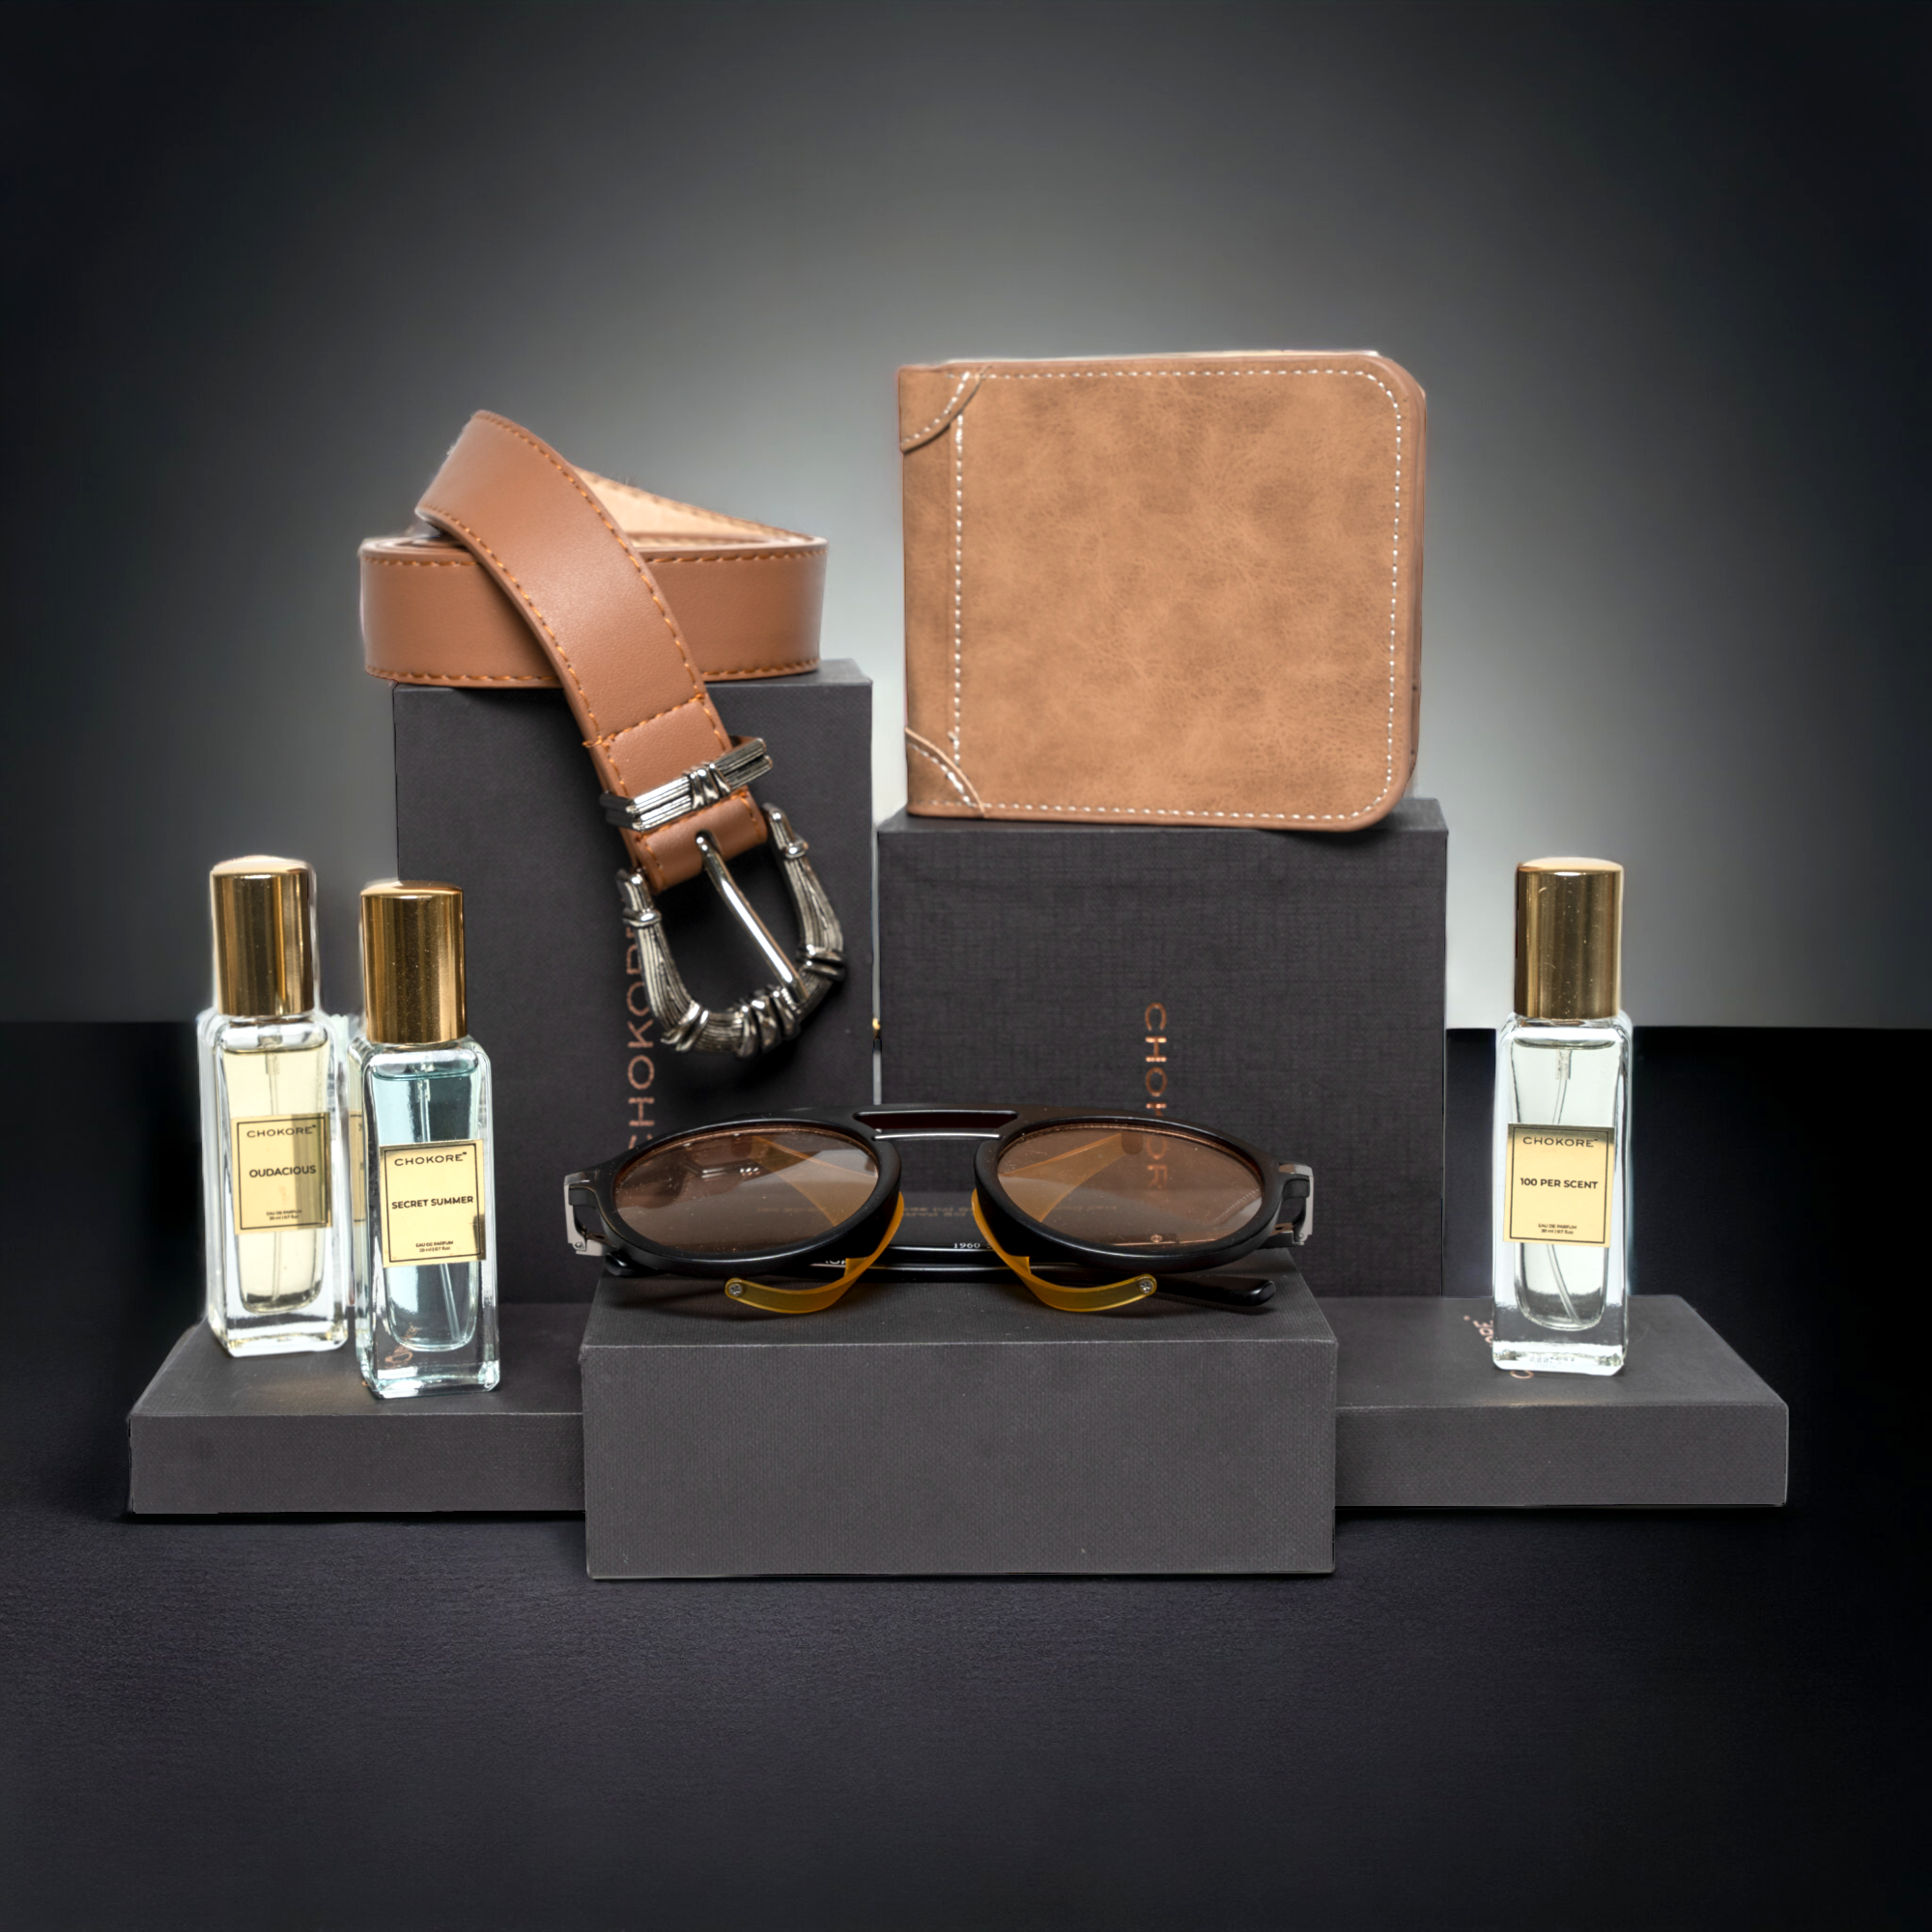 Chokore Special 4-in-1 Gift Set for Him & Her (Belt, Wallet, Sunglasses, & Perfume Combo)